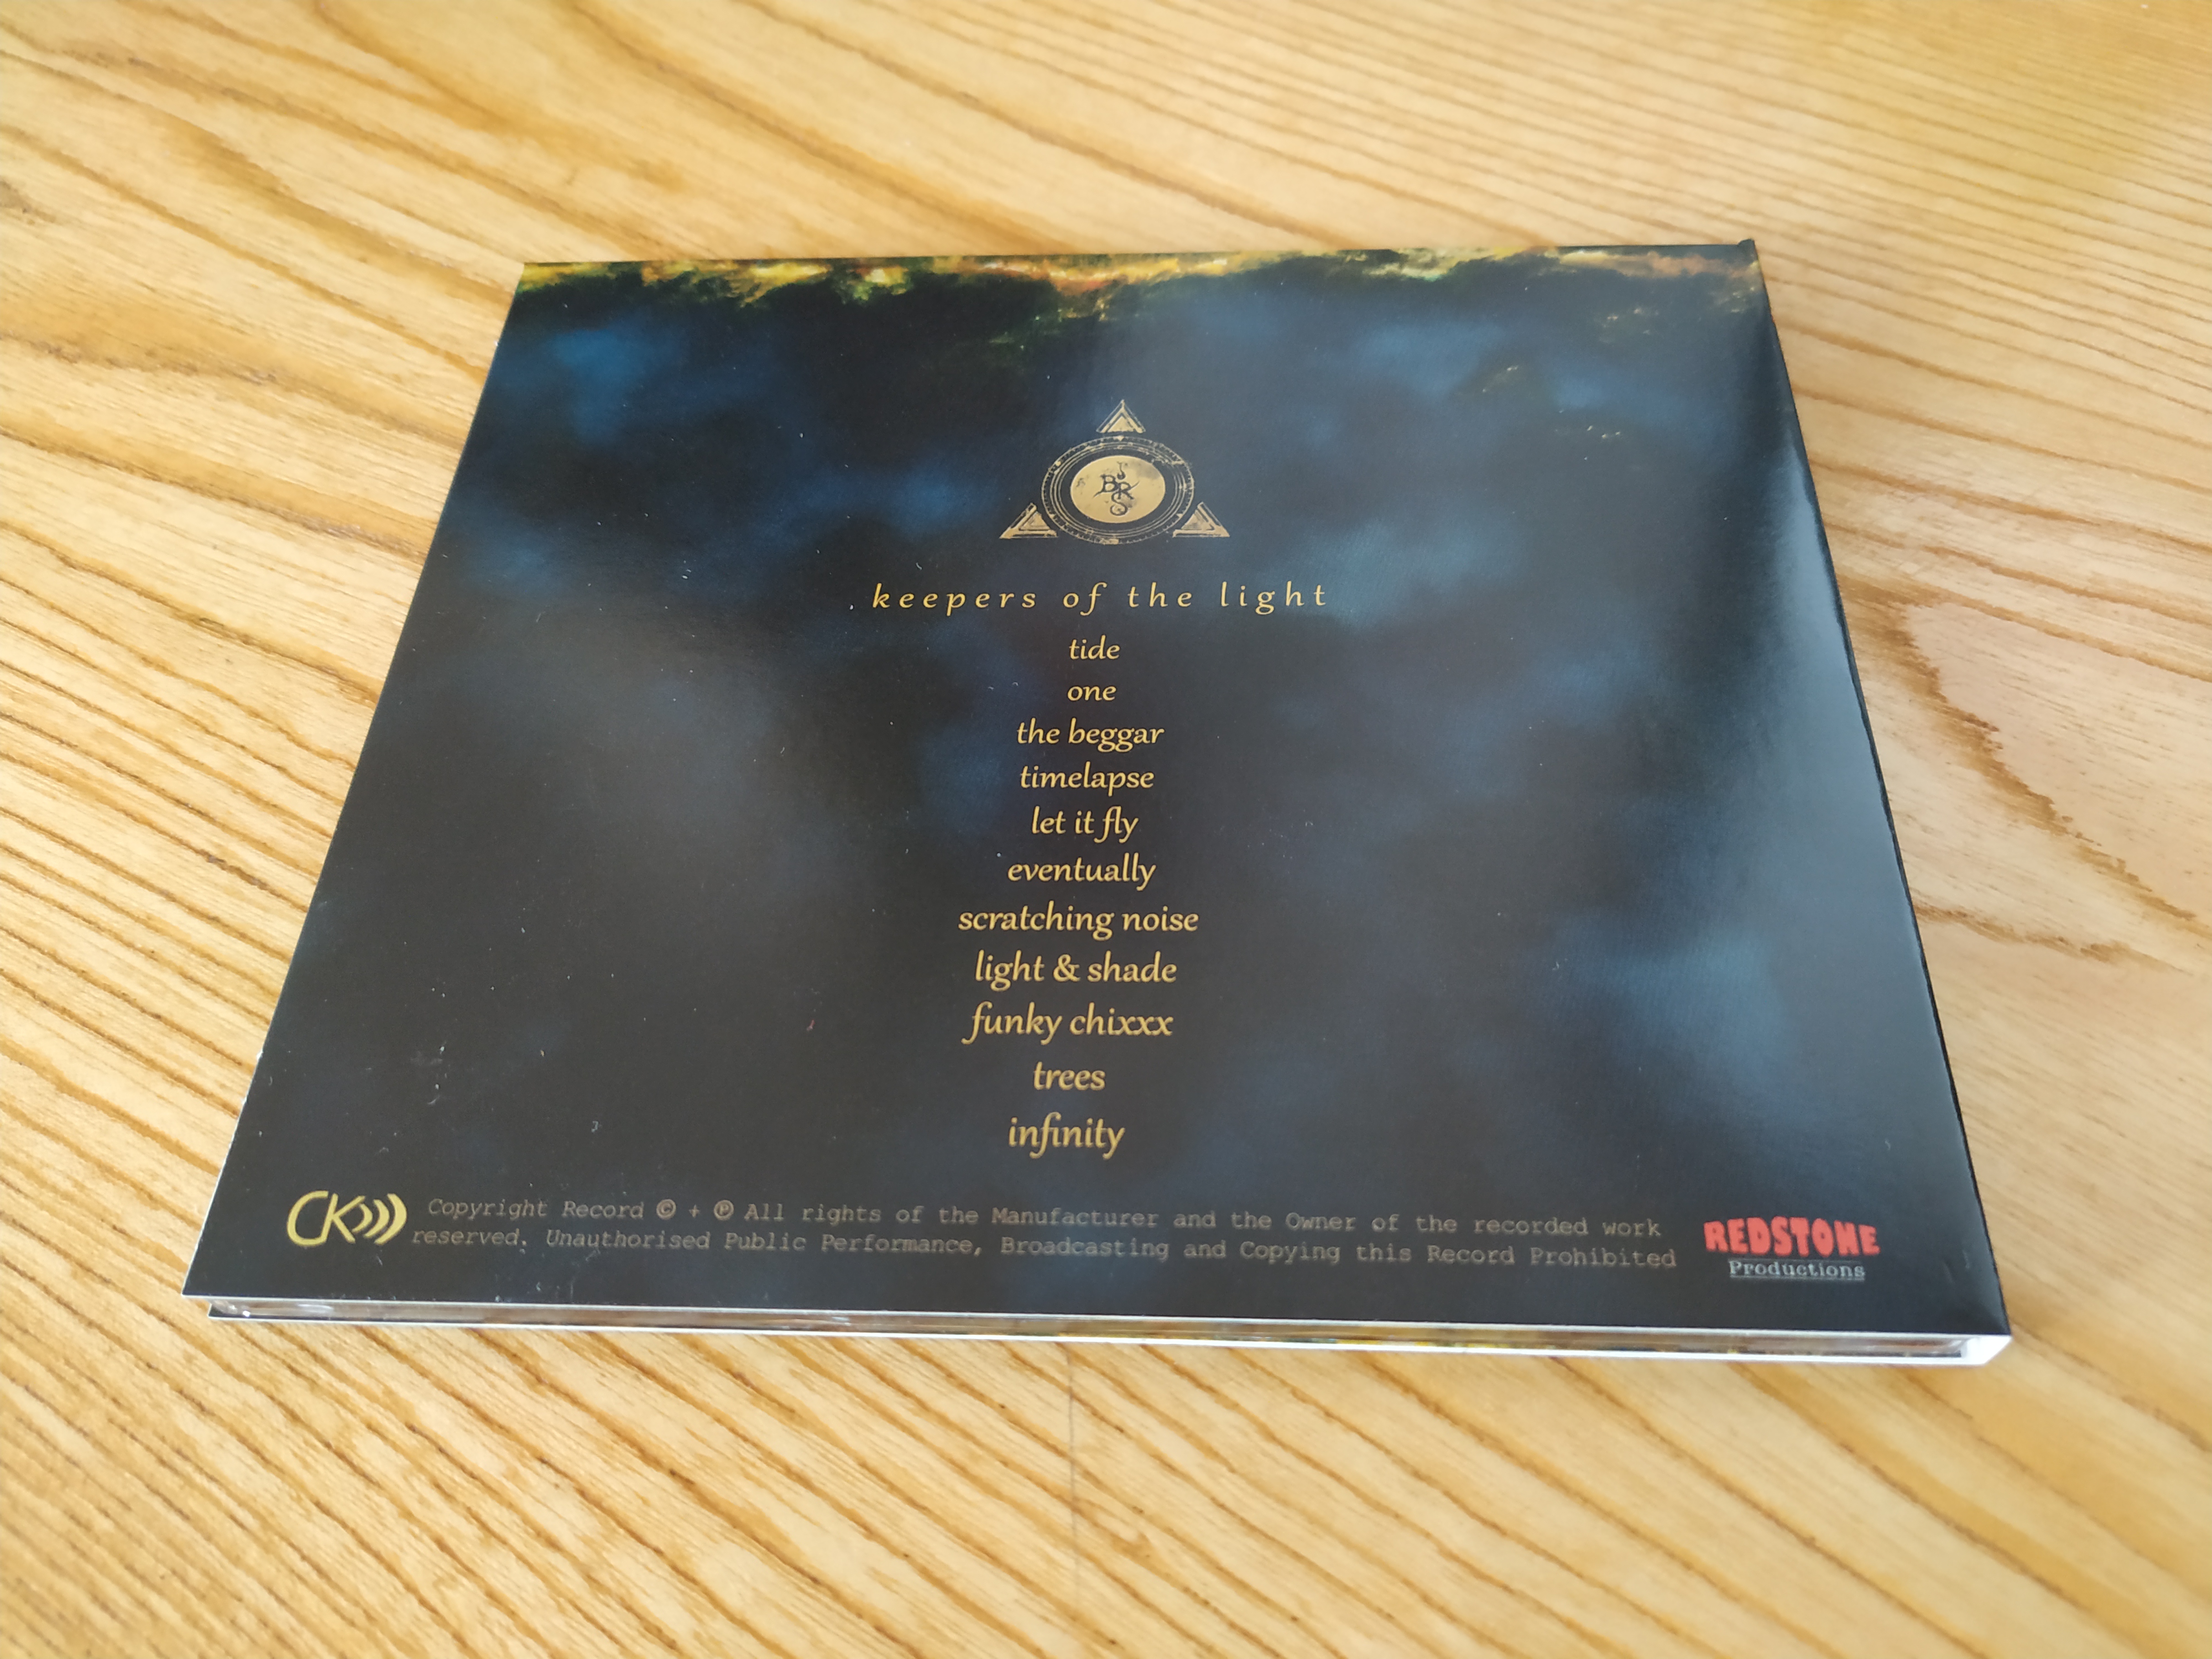 keepers of the light - CD backside